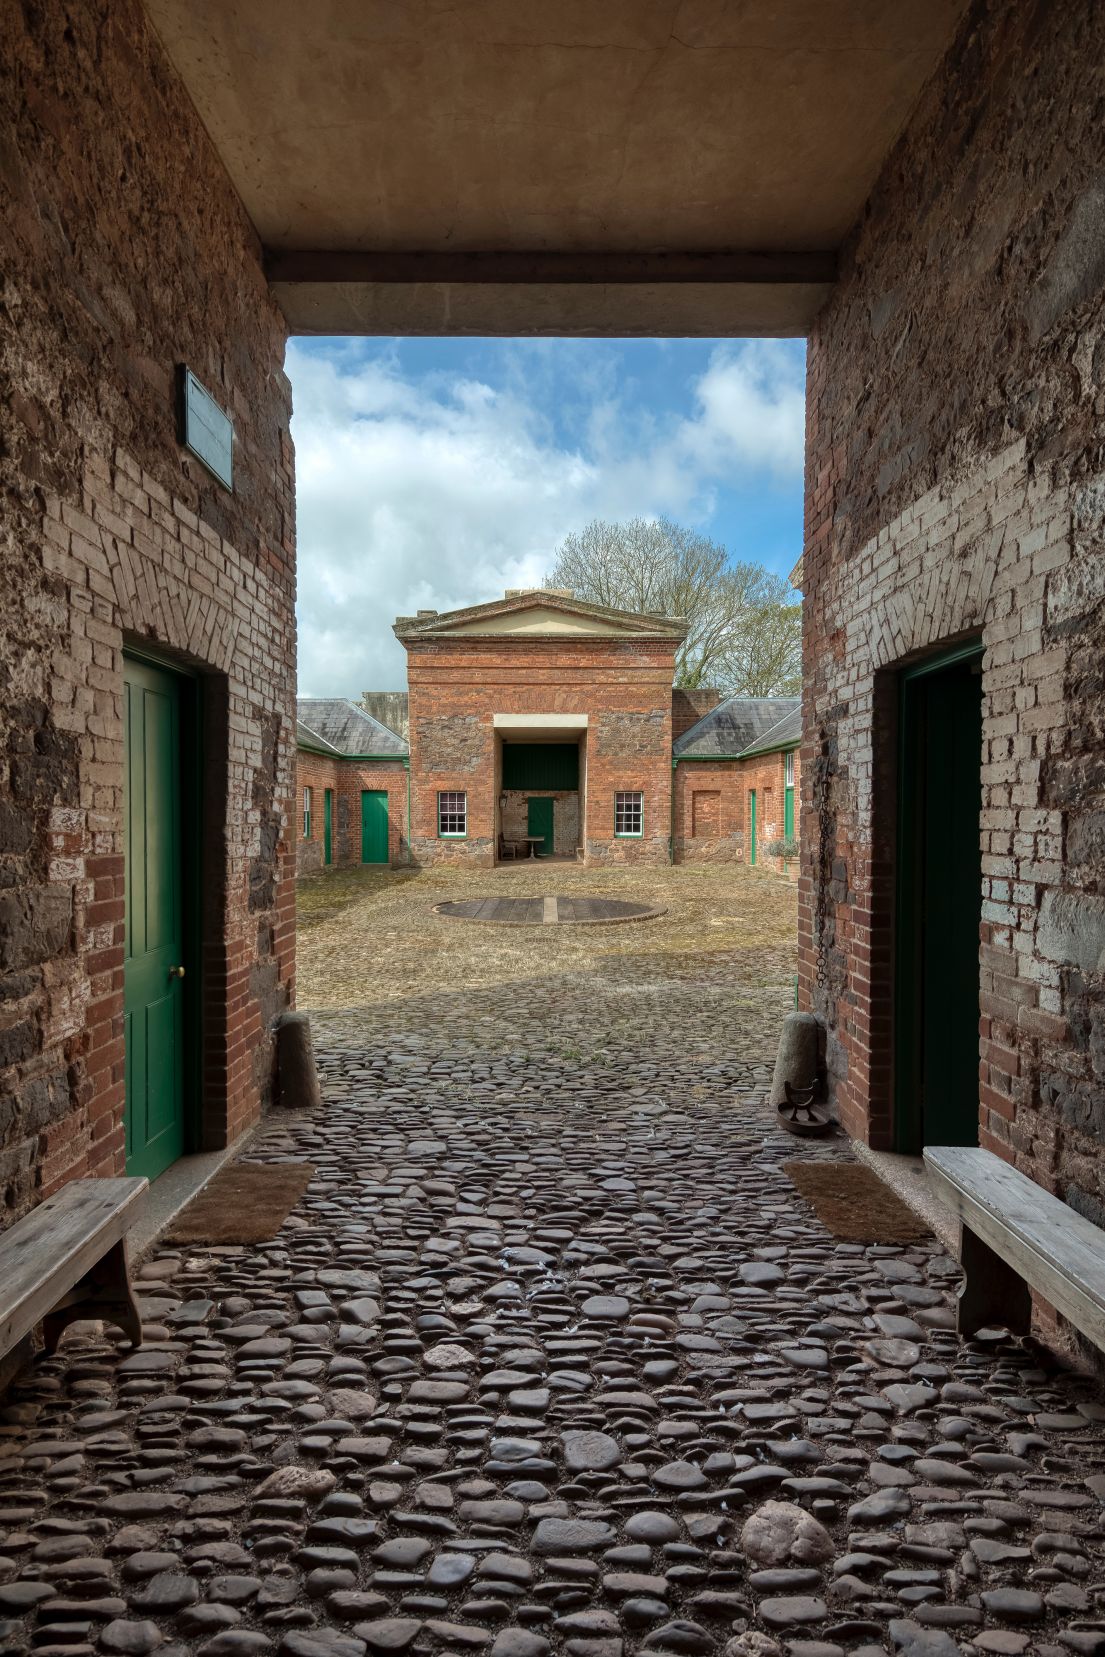 Looking through a cobbled passage towards a cobbled courtyard. Surrounding the courtyard are red bricked building with green doors.